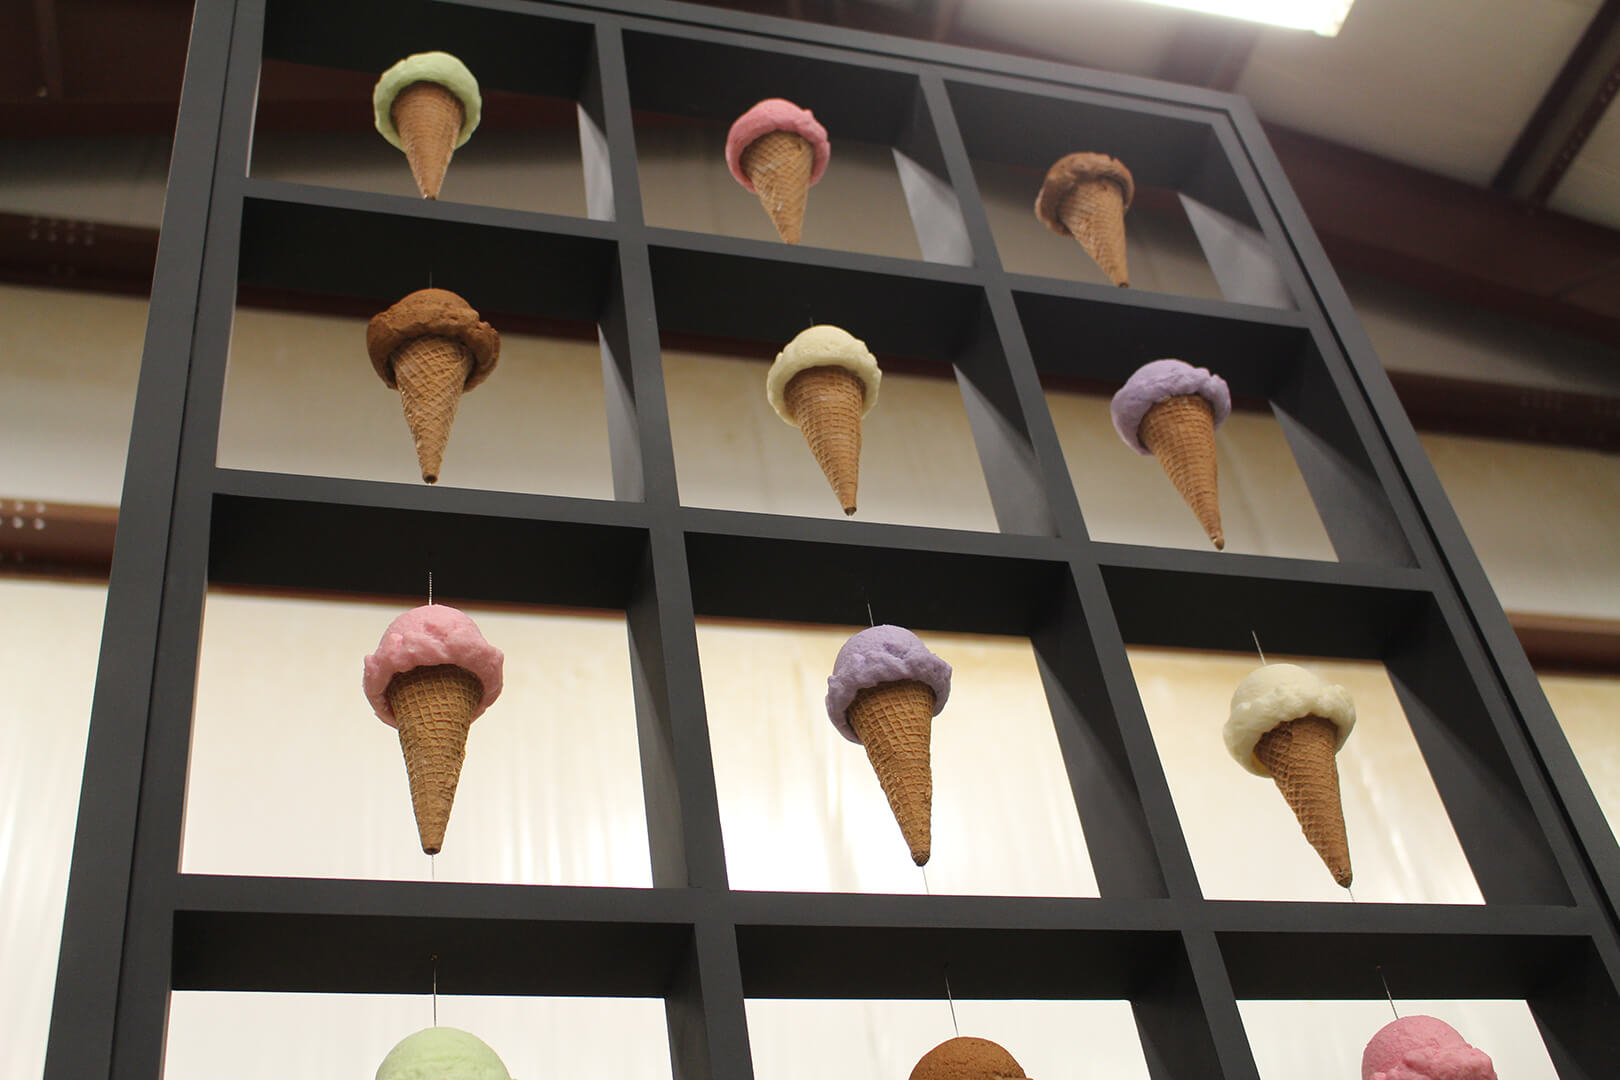 Ice cream display for Cream & Sugar in the ZENTX workshop, showing artificial ice cream cones suspended between segments of the frame